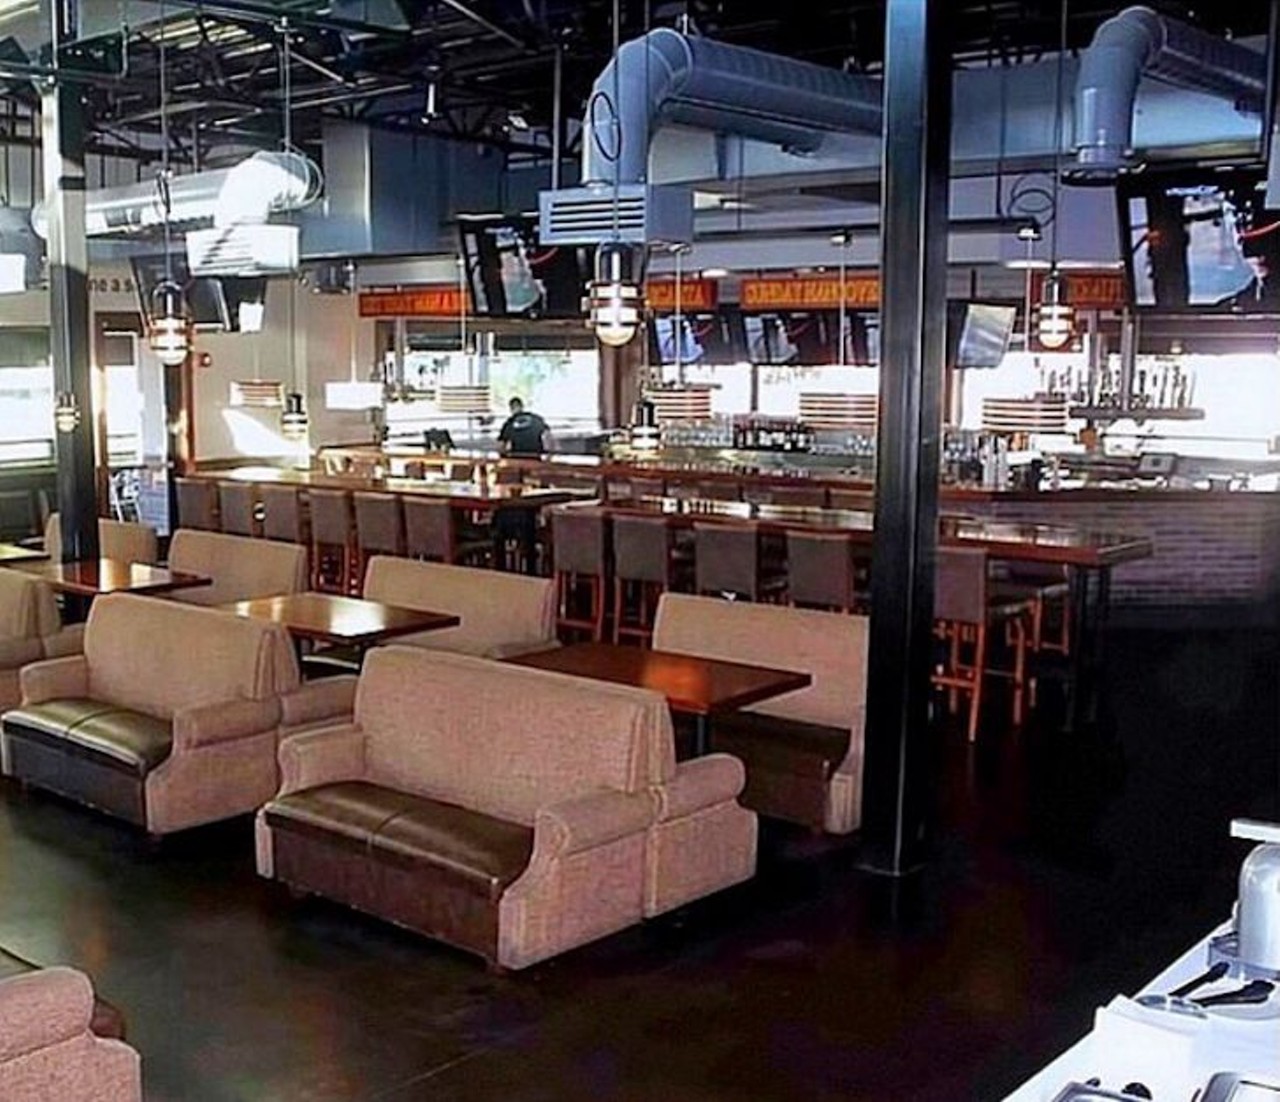 Brick House Tavern + Tap 
8440 International Drive, 407-355-0321 
With couches in the booths to add to the cozy ambiance, drinking at the Brick House Tavern and Tap will be one for the books. Doors open at 11 a.m. 
Photo via partypartnersoforlando/Instagram